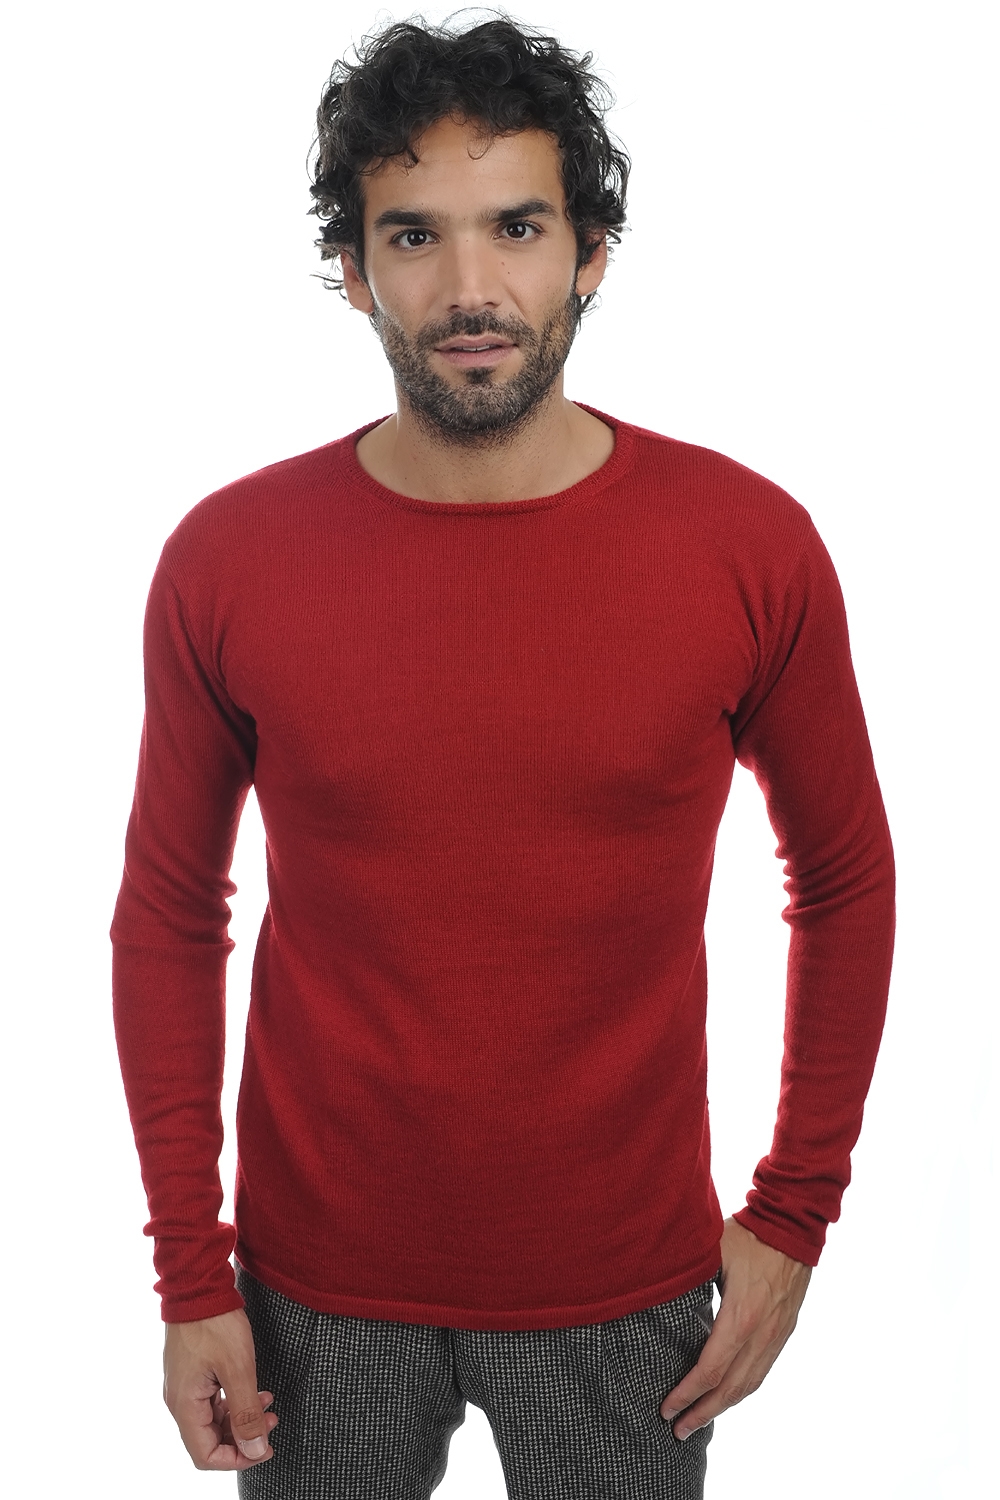 Baby Alpaga pull homme col rond christian rouge l